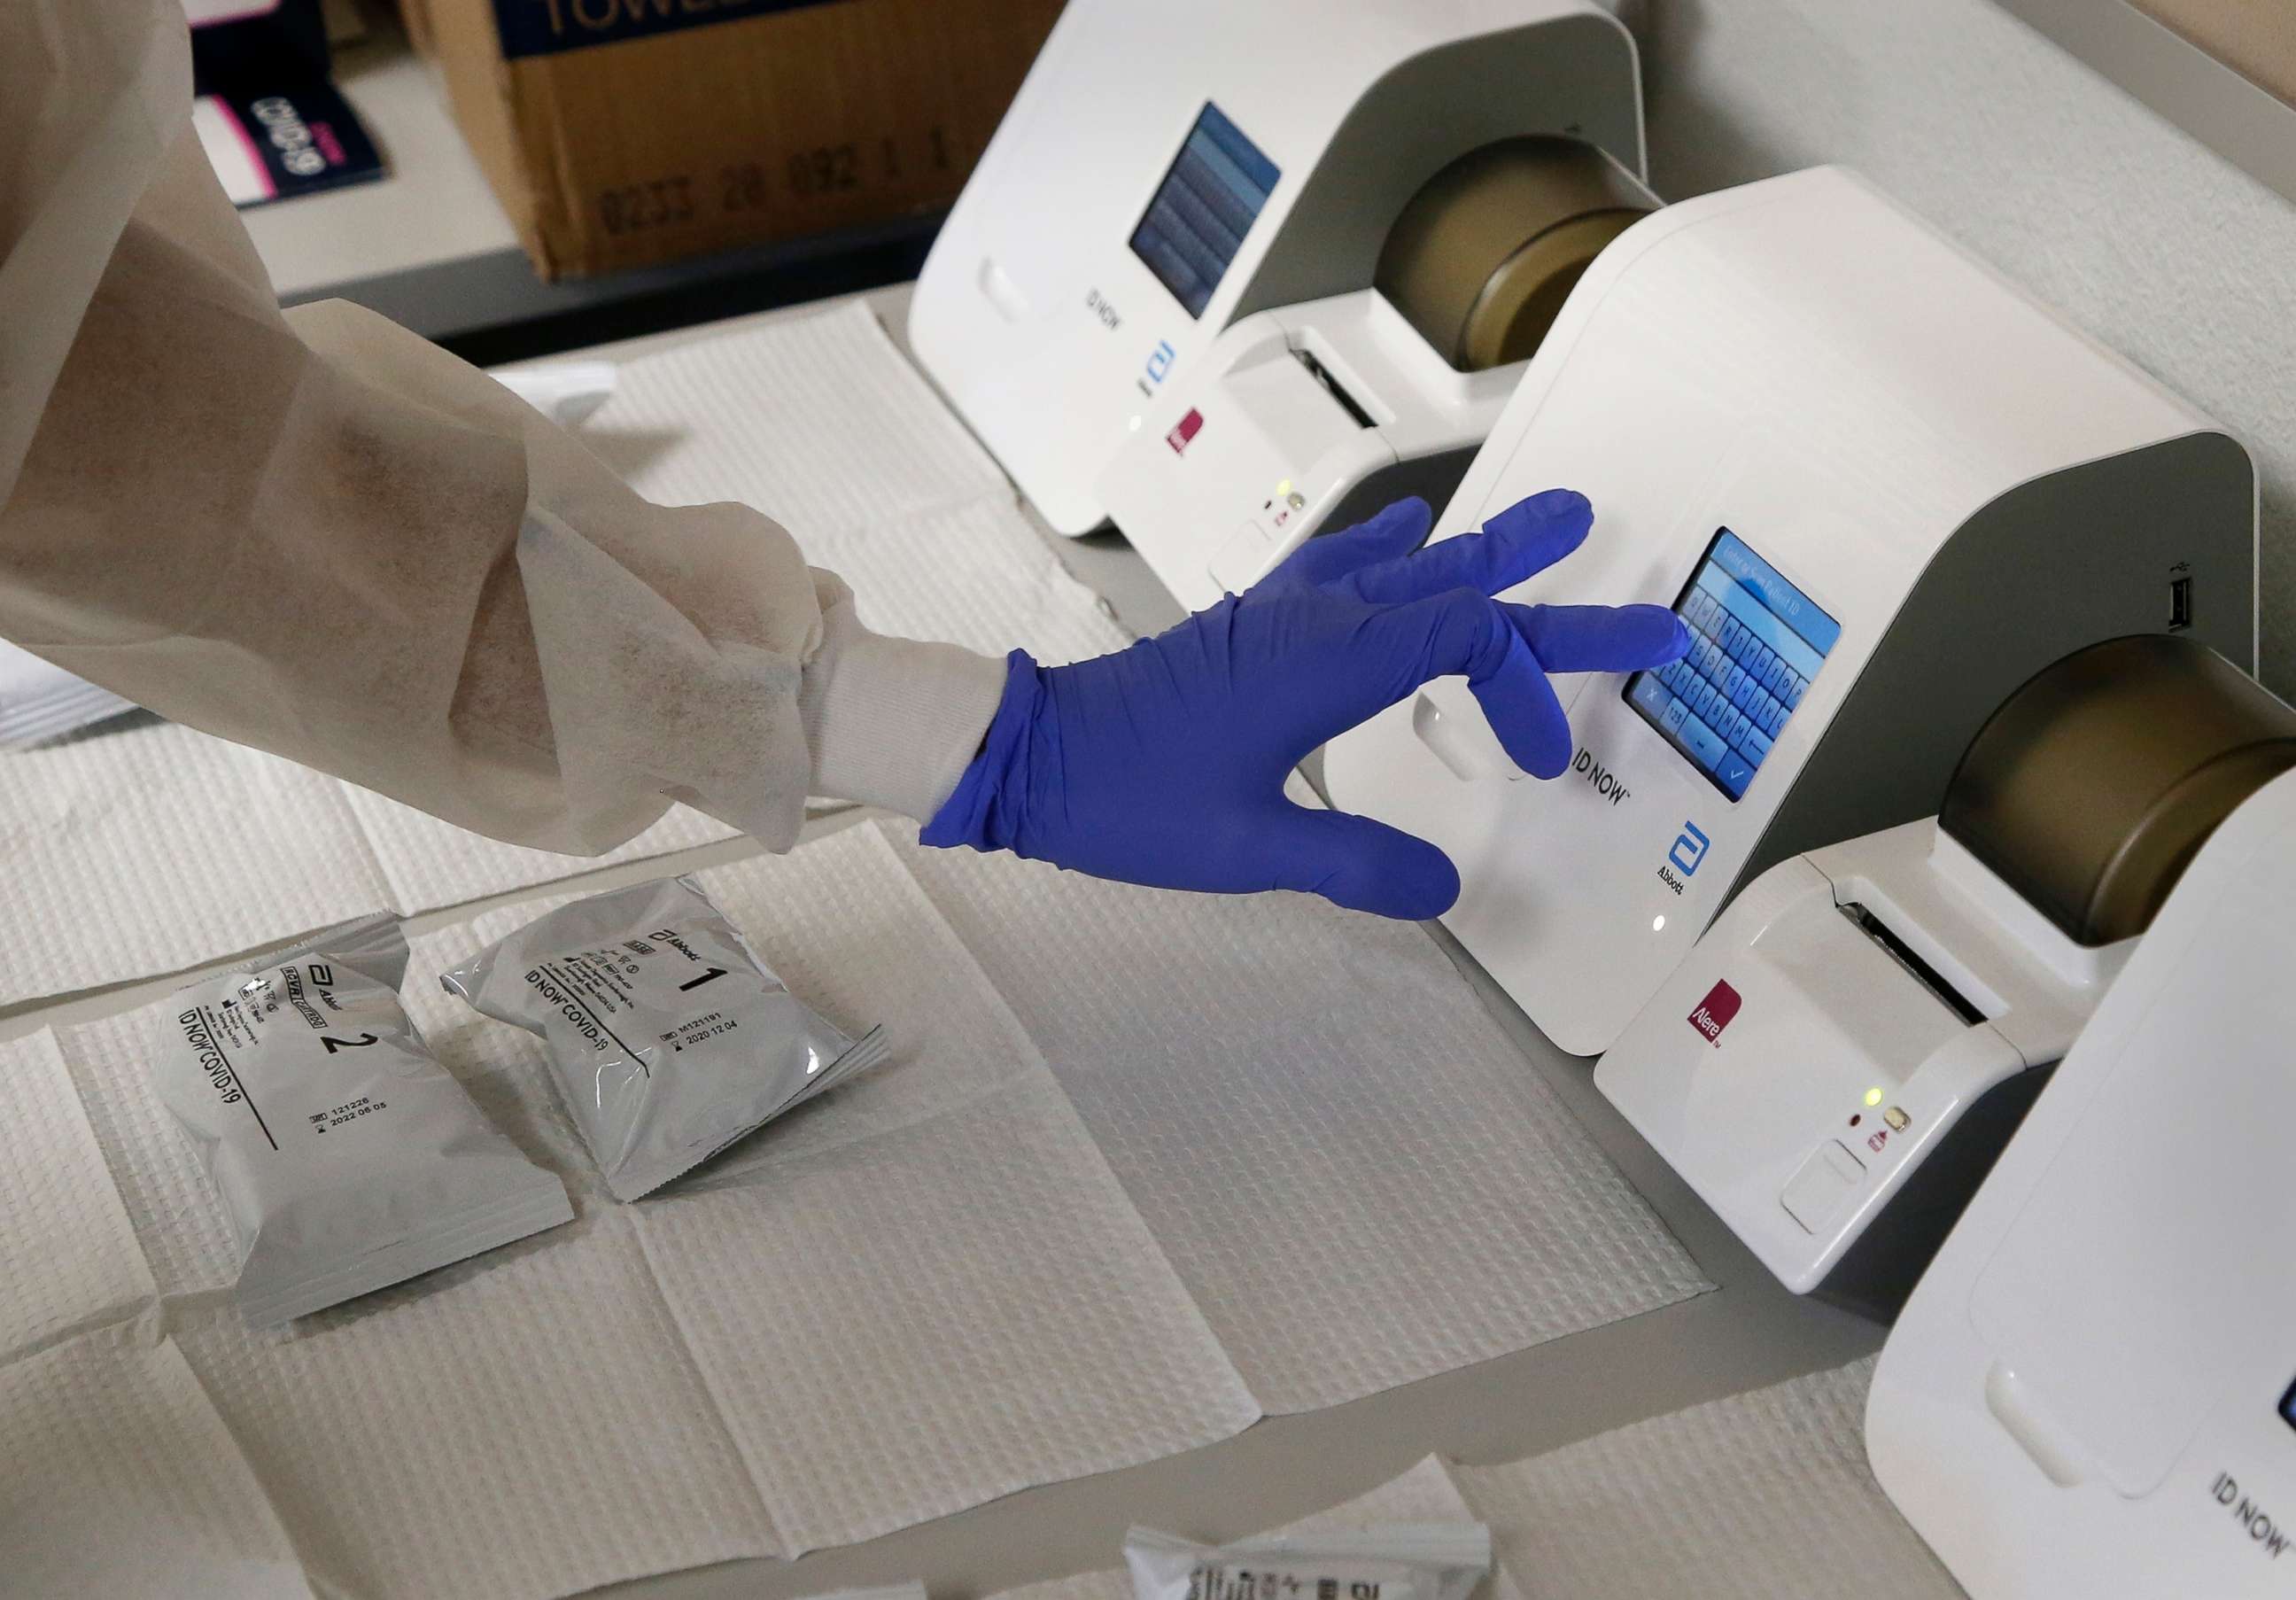 PHOTO: A pharmacy technician demonstrates how COVID-19 tests are processed in a testing area set up by CVS at St. Vincent de Paul medical clinic in Phoenix, June 15, 2020.